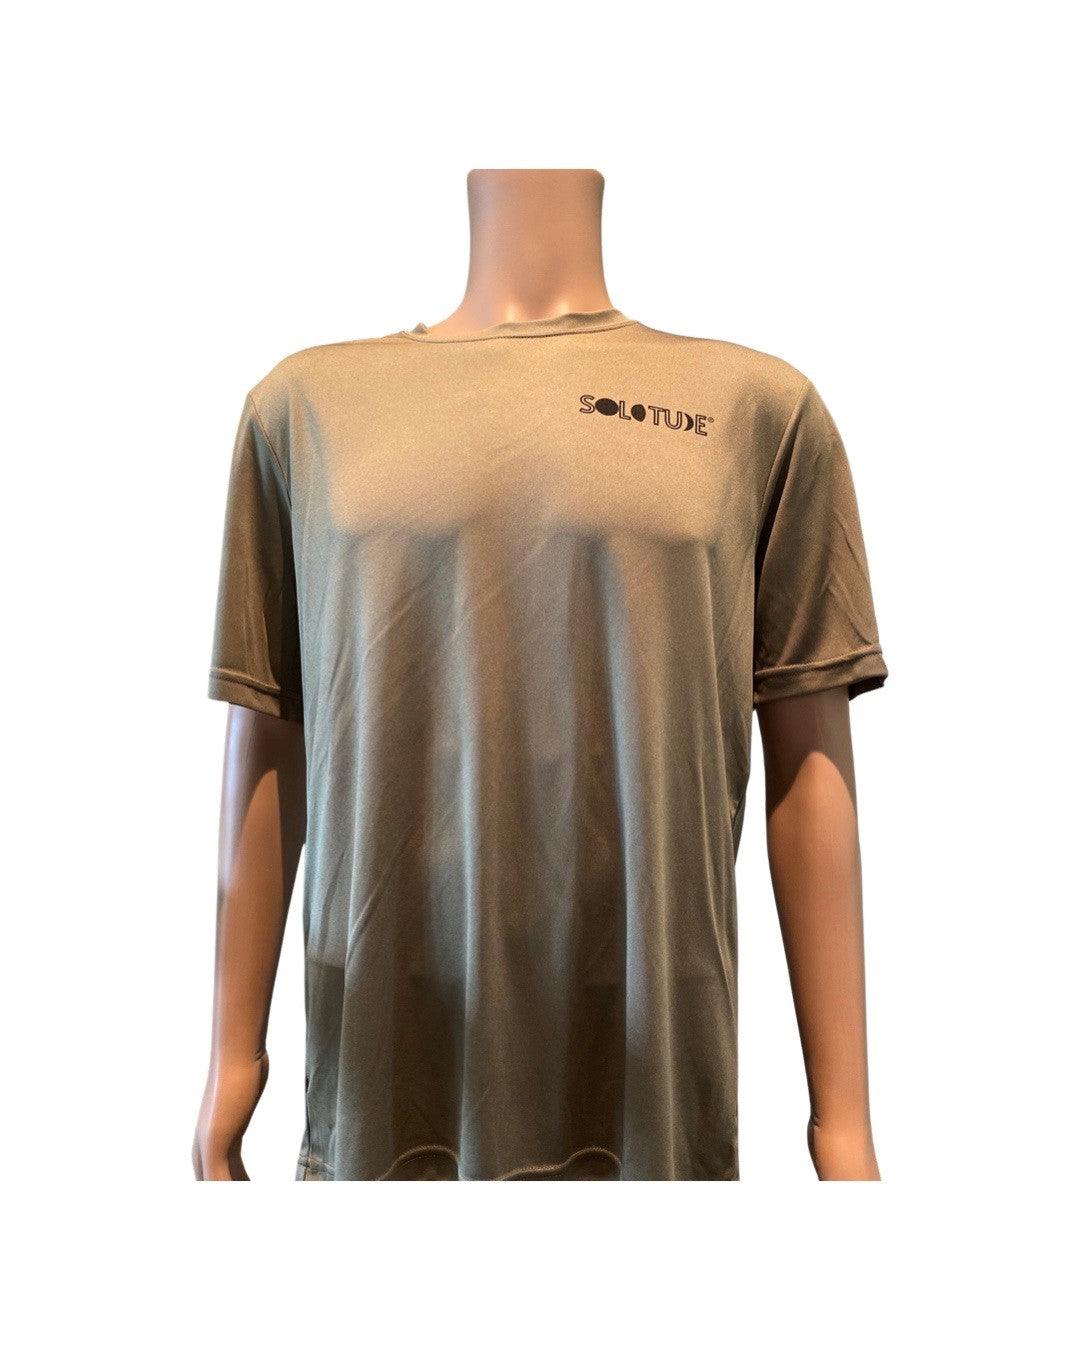 Performance Polyester Short Sleeved Shirt (Color Selections)